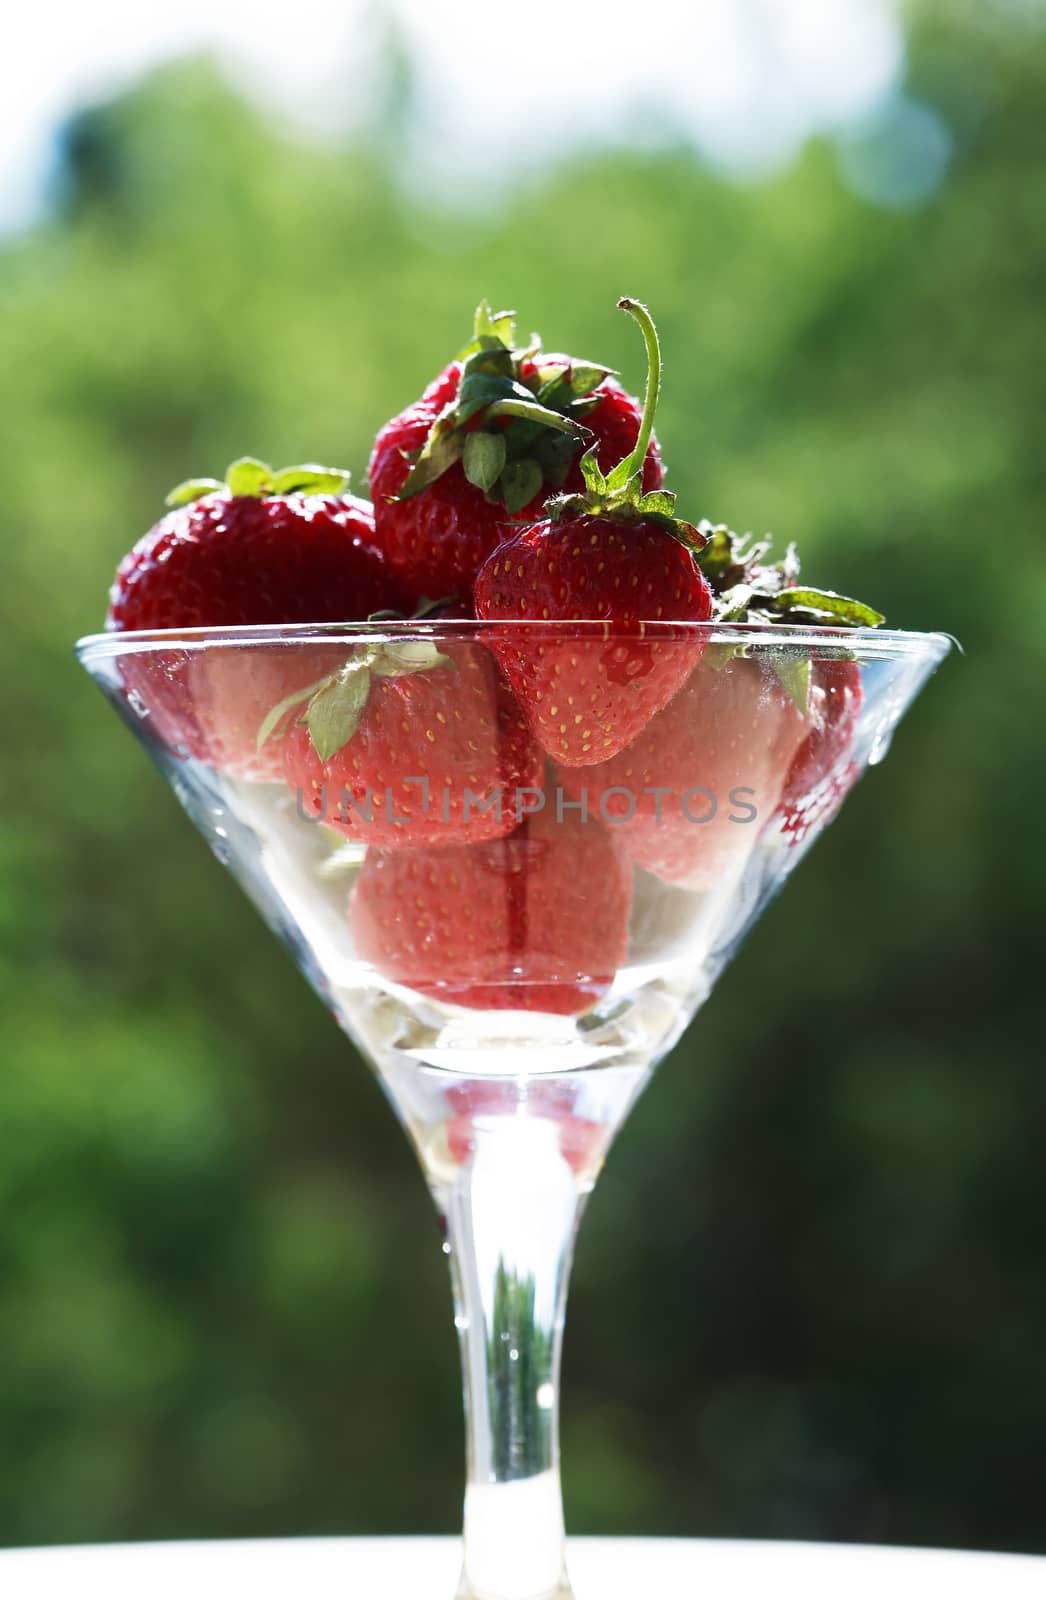 Few strawberry fruits in nice glass bowl against green plants